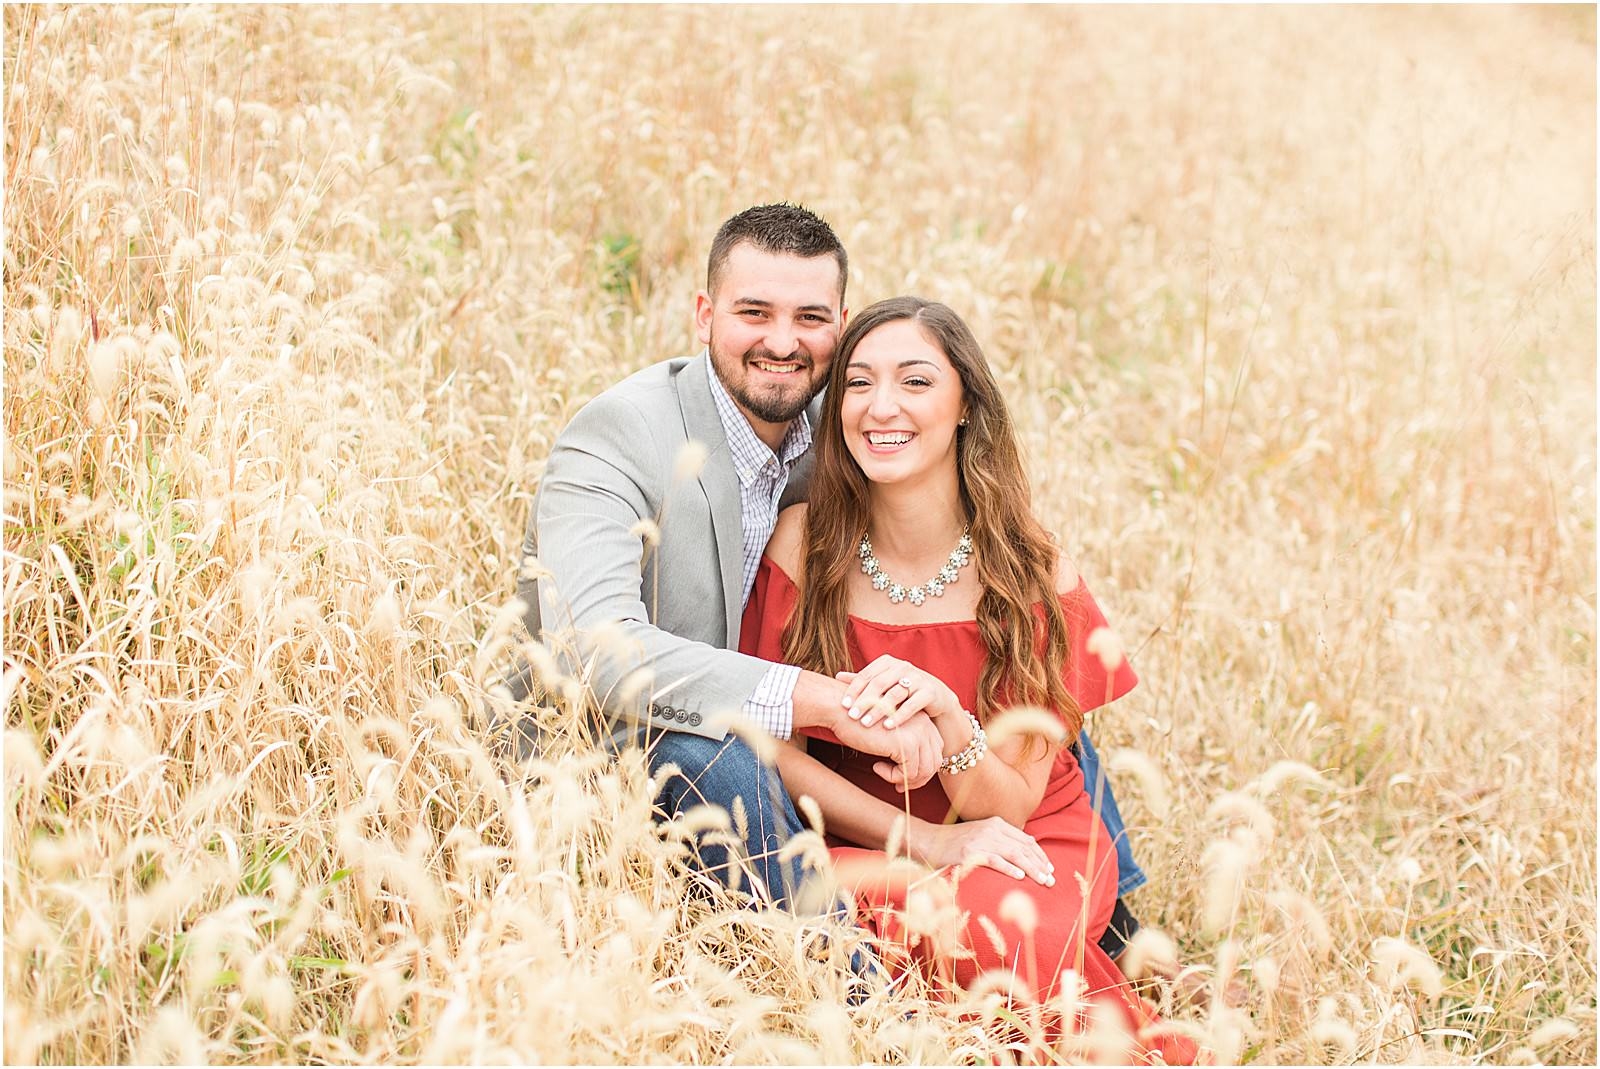 A Fall Oliver Winery Engagement Session | Sally and Andrew | Bret and Brandie Photography 0036.jpg